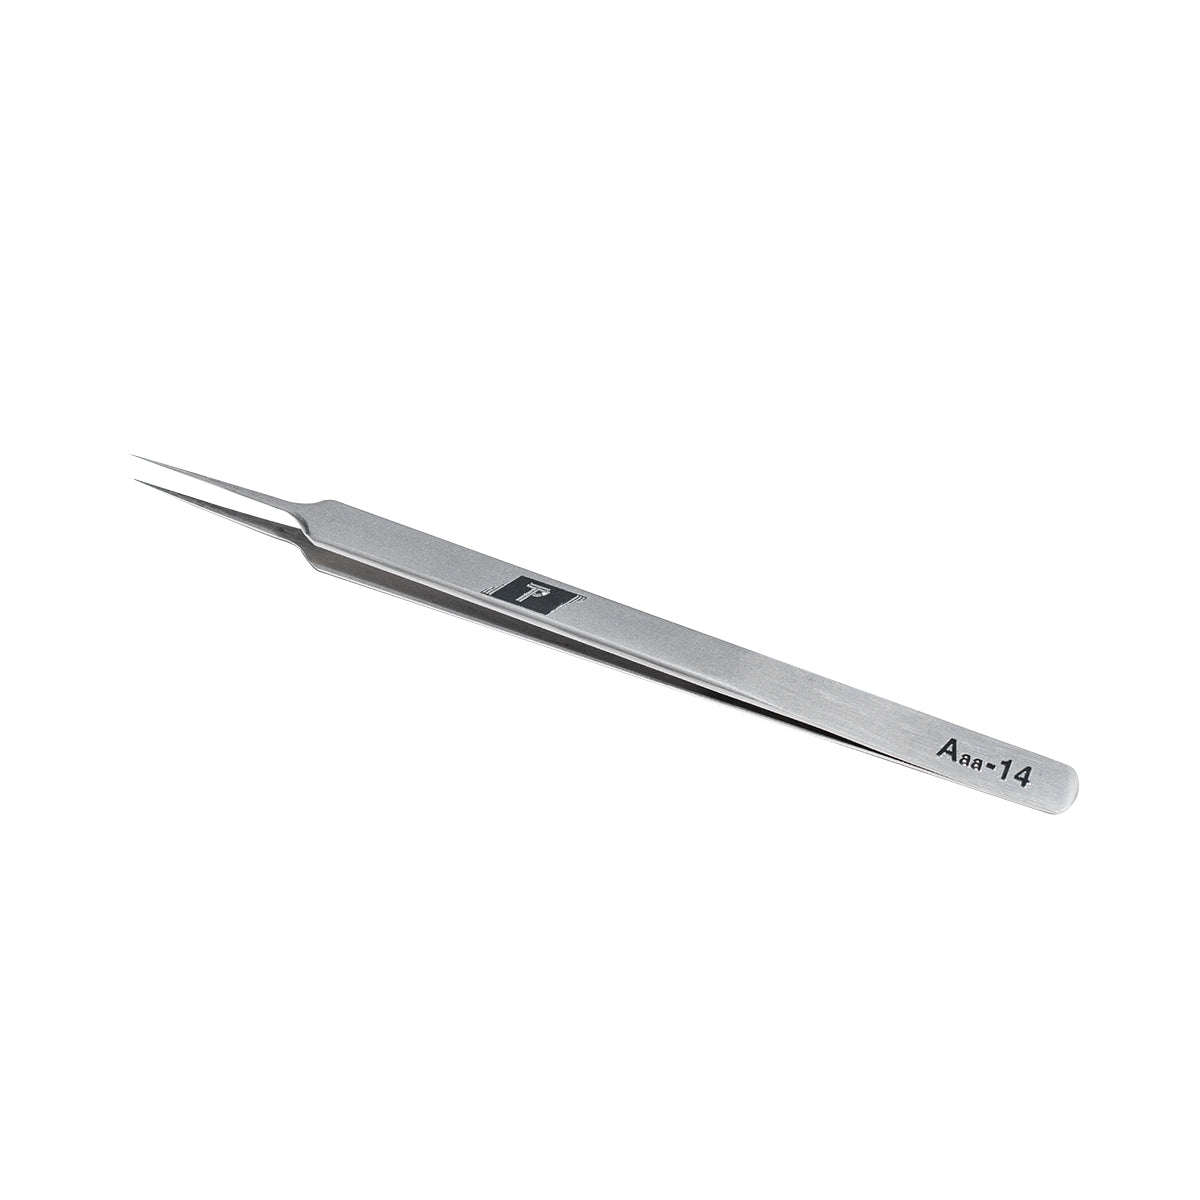 Techni-Pro 758TW240 - High Precision Tweezers, Style F,  Anti-Acid/Anti-Magnetic, Stainless Steel, Squared, 4.7